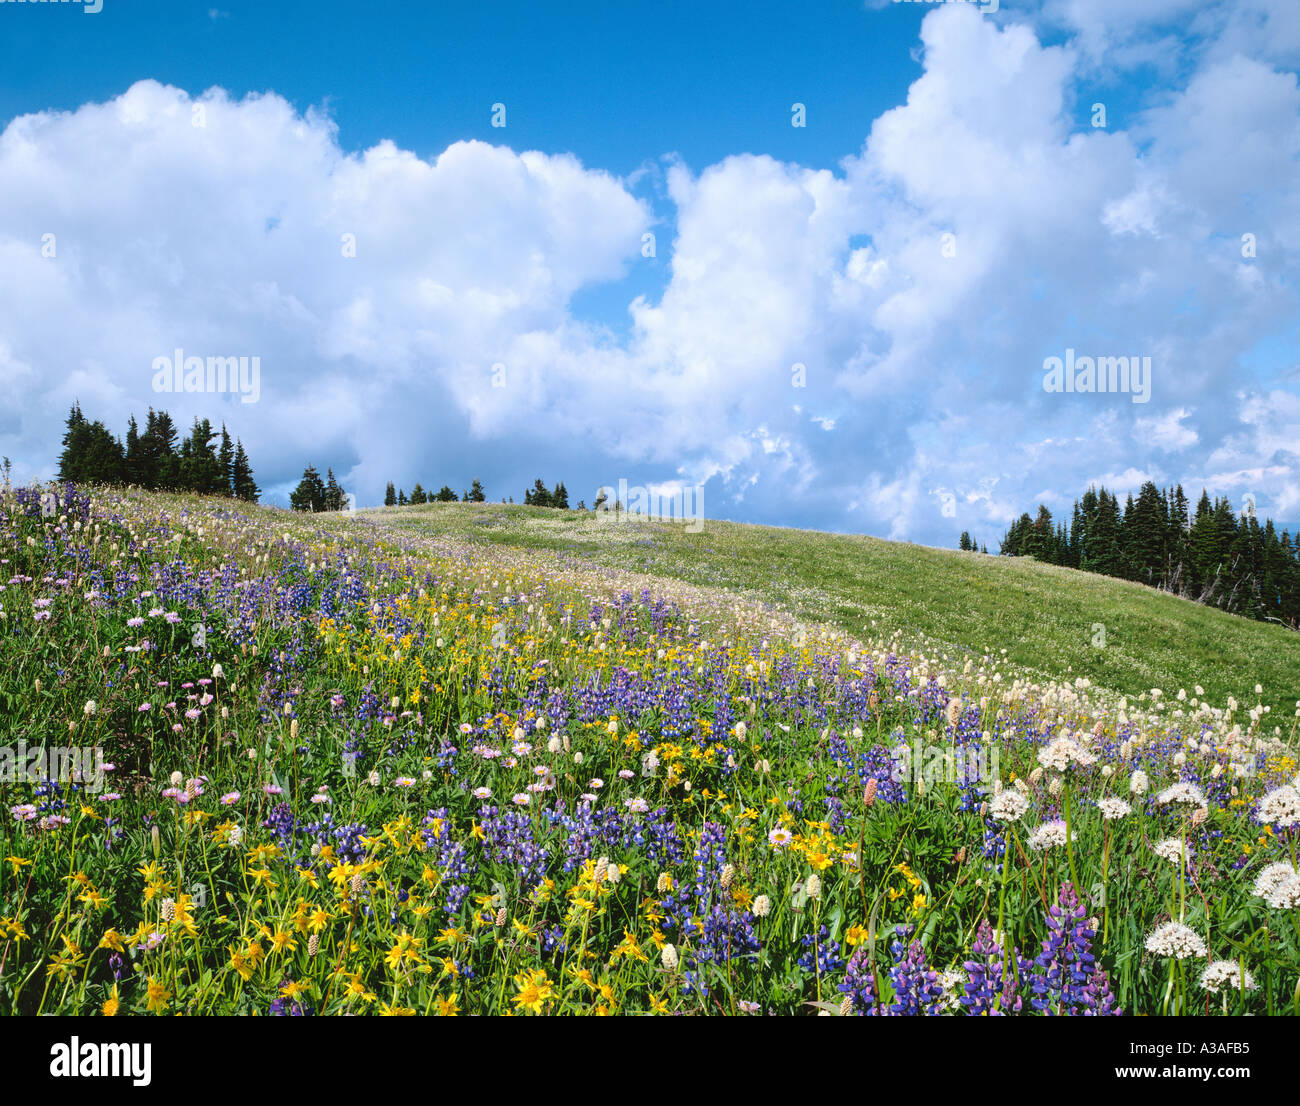 Mt Baker Wilderness Area, Washington State, USA, Pacific NW, North Cascades, Wildflowers, Skyline Divide, Lupine, Arnica Stock Photo